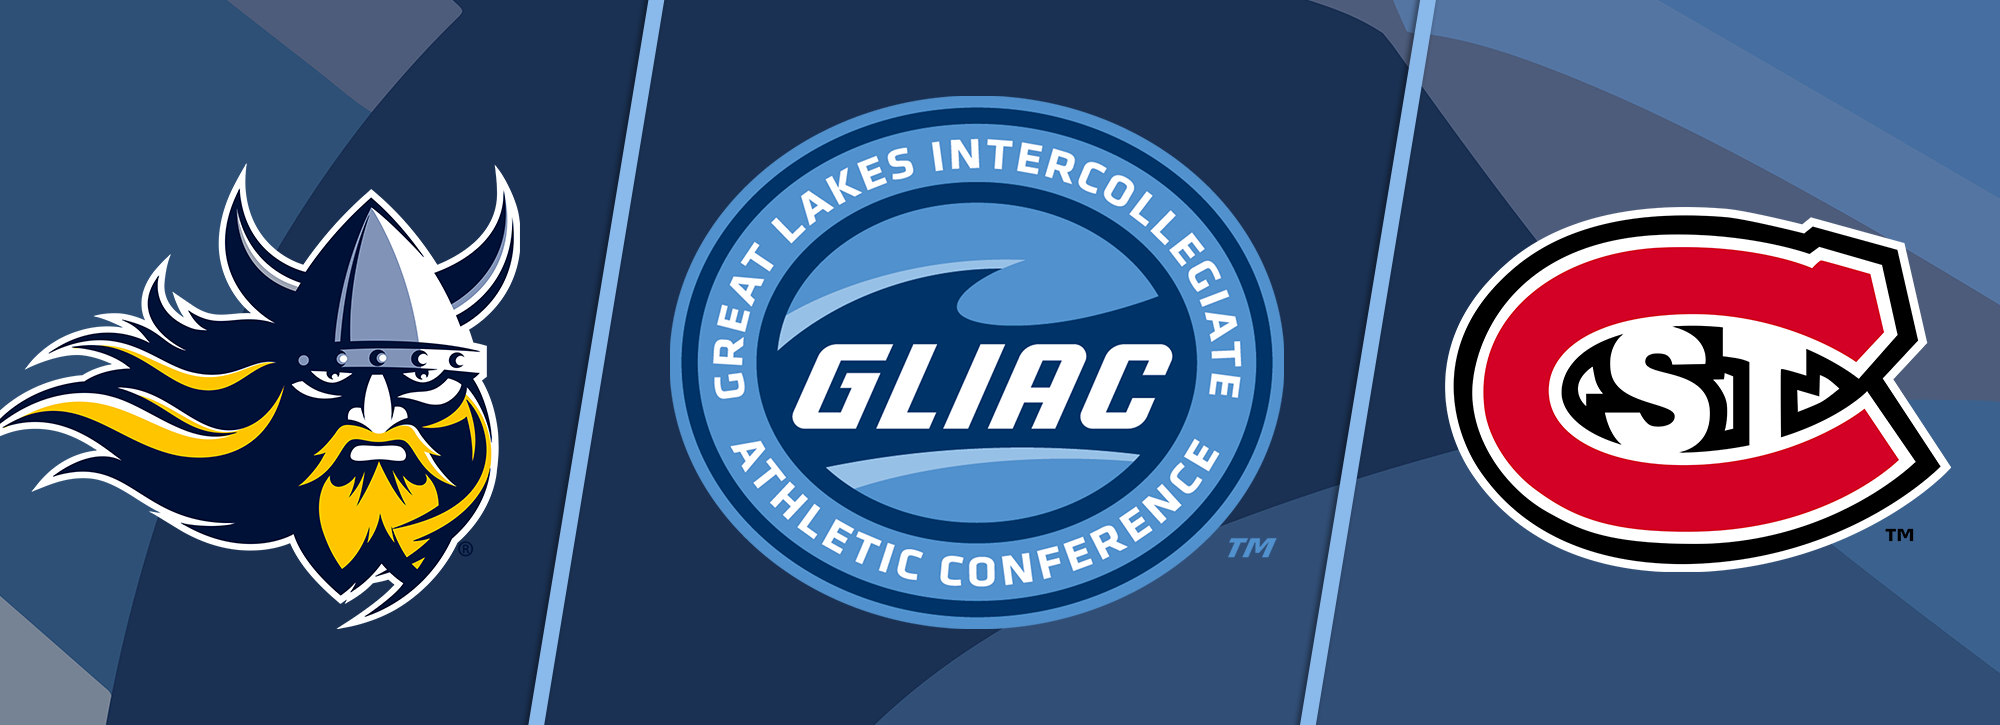 Augustana's Men's Swim & Dive and St. Cloud State's Men's Soccer Join GLIAC as Affiliate Members